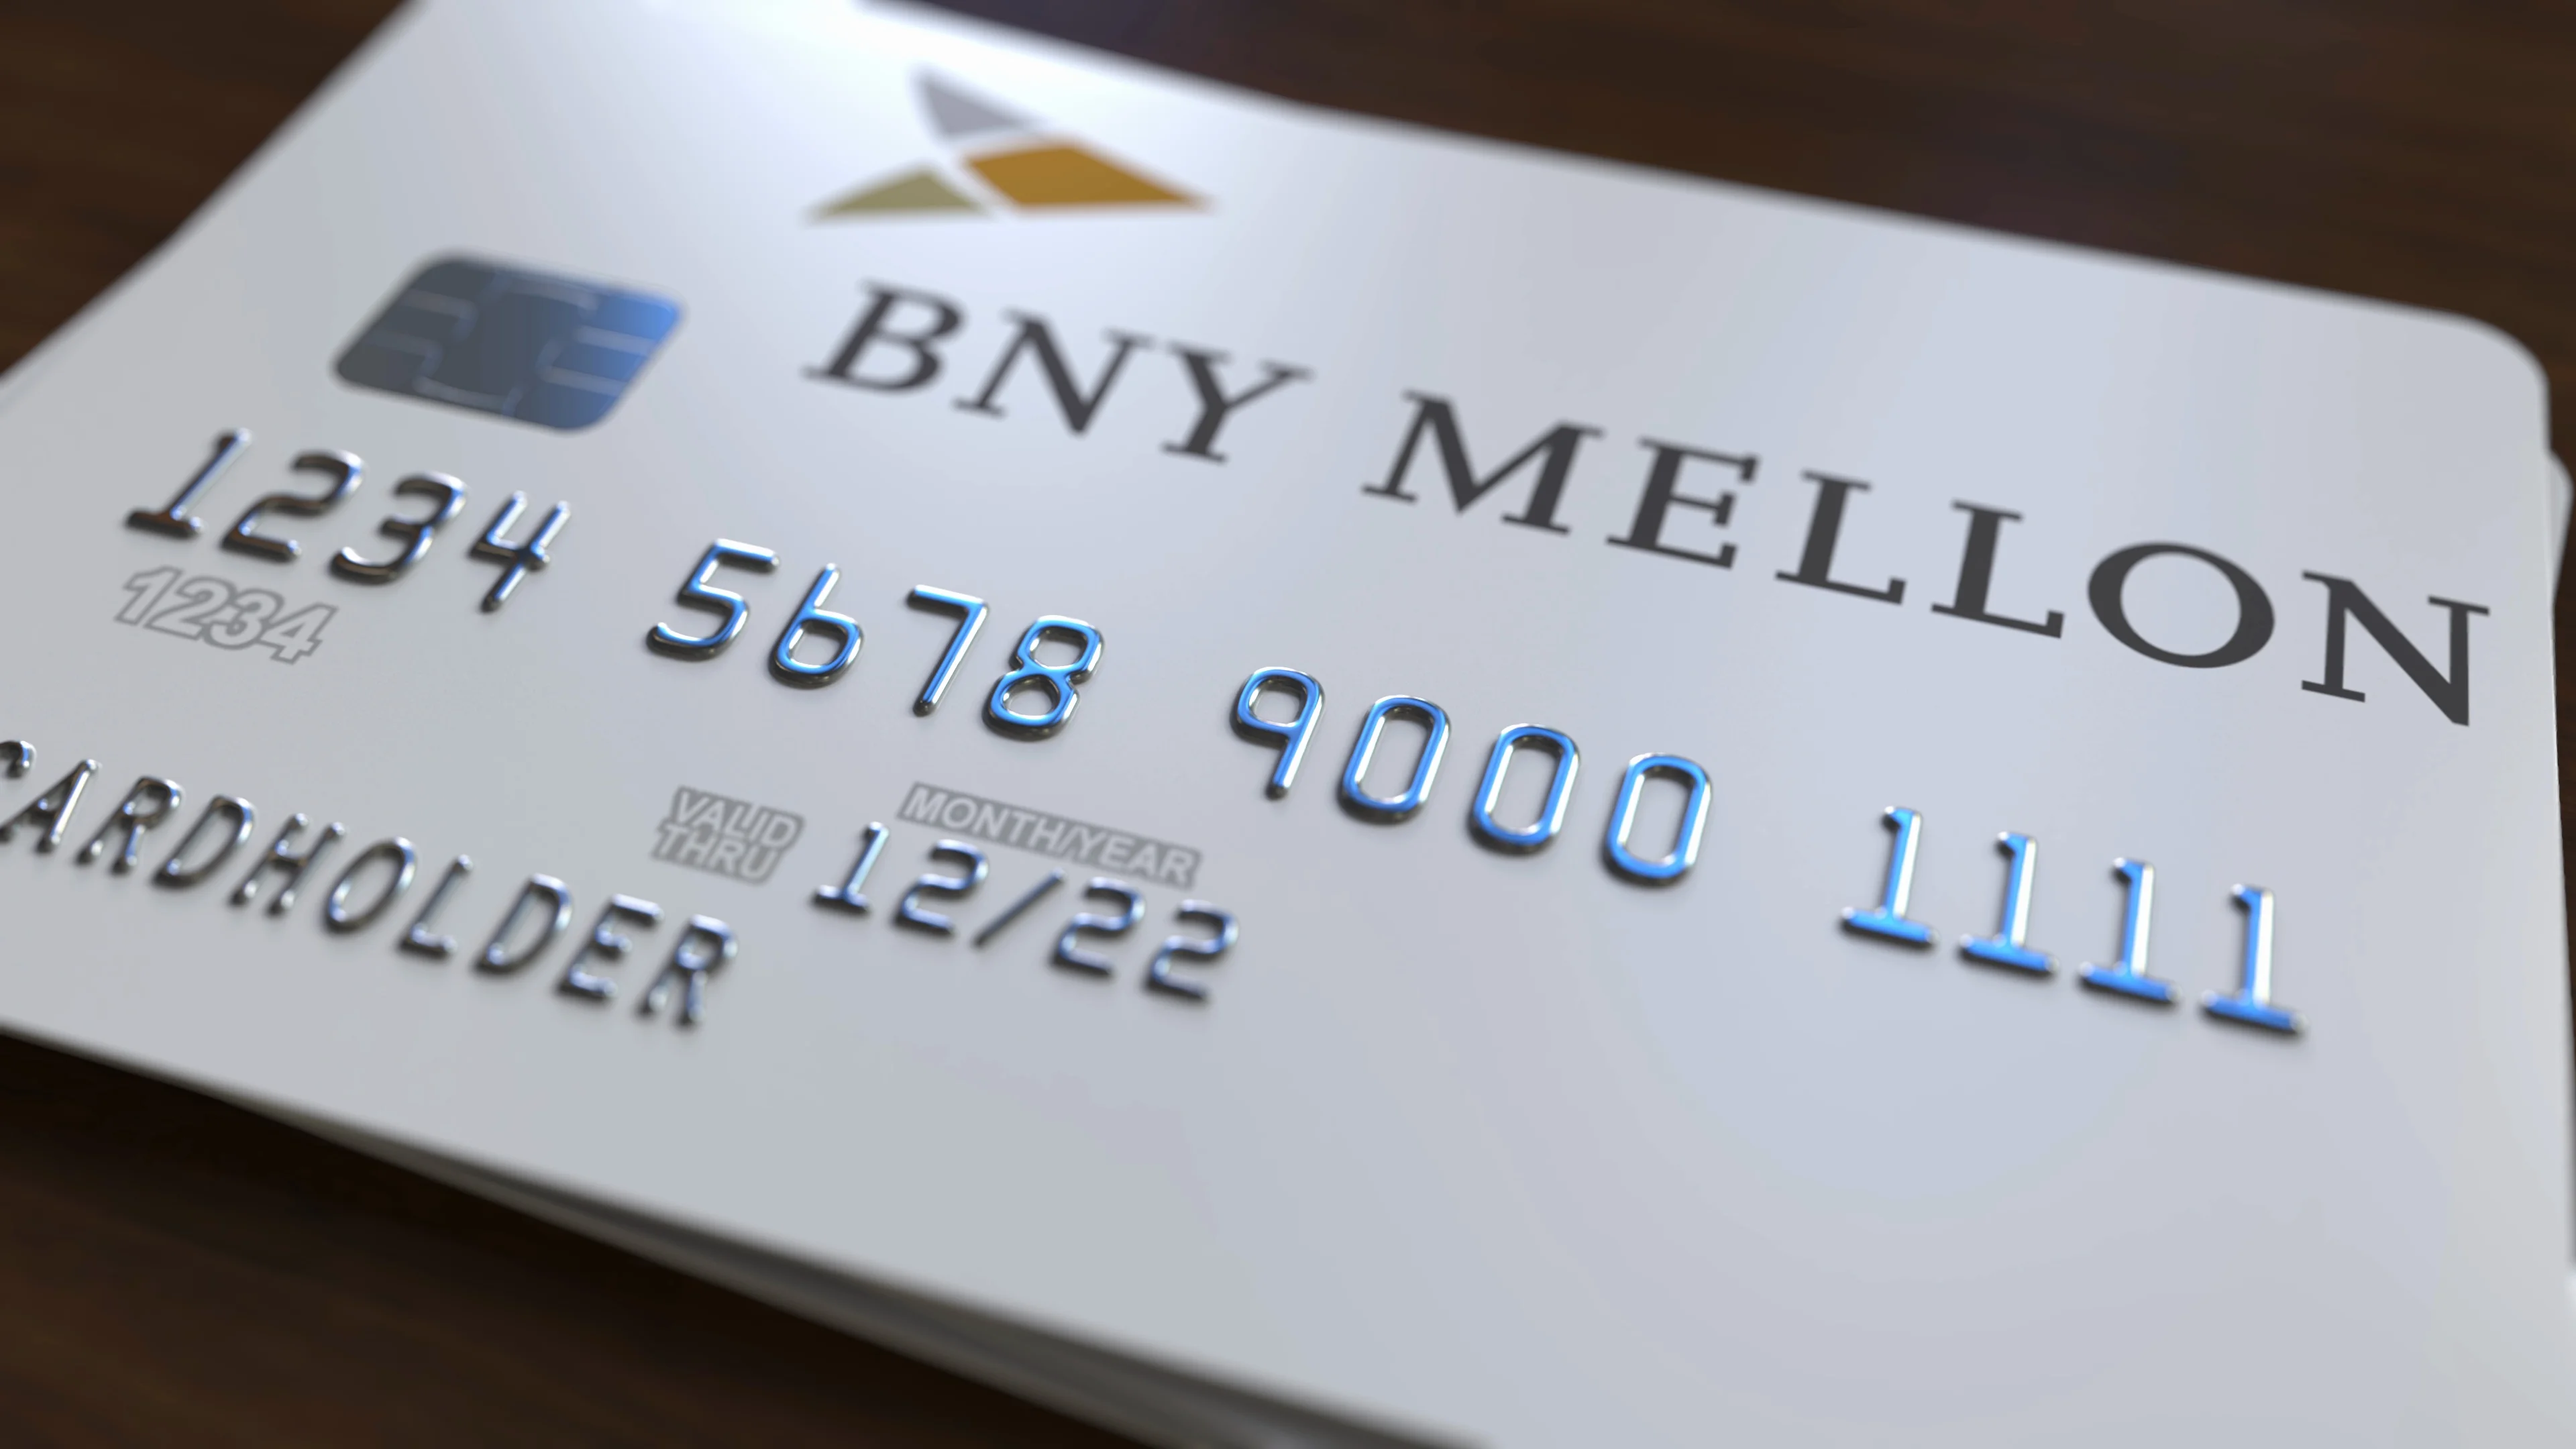 Video Plastic Card With Logo Of The Bank Of New York Mellon Bny